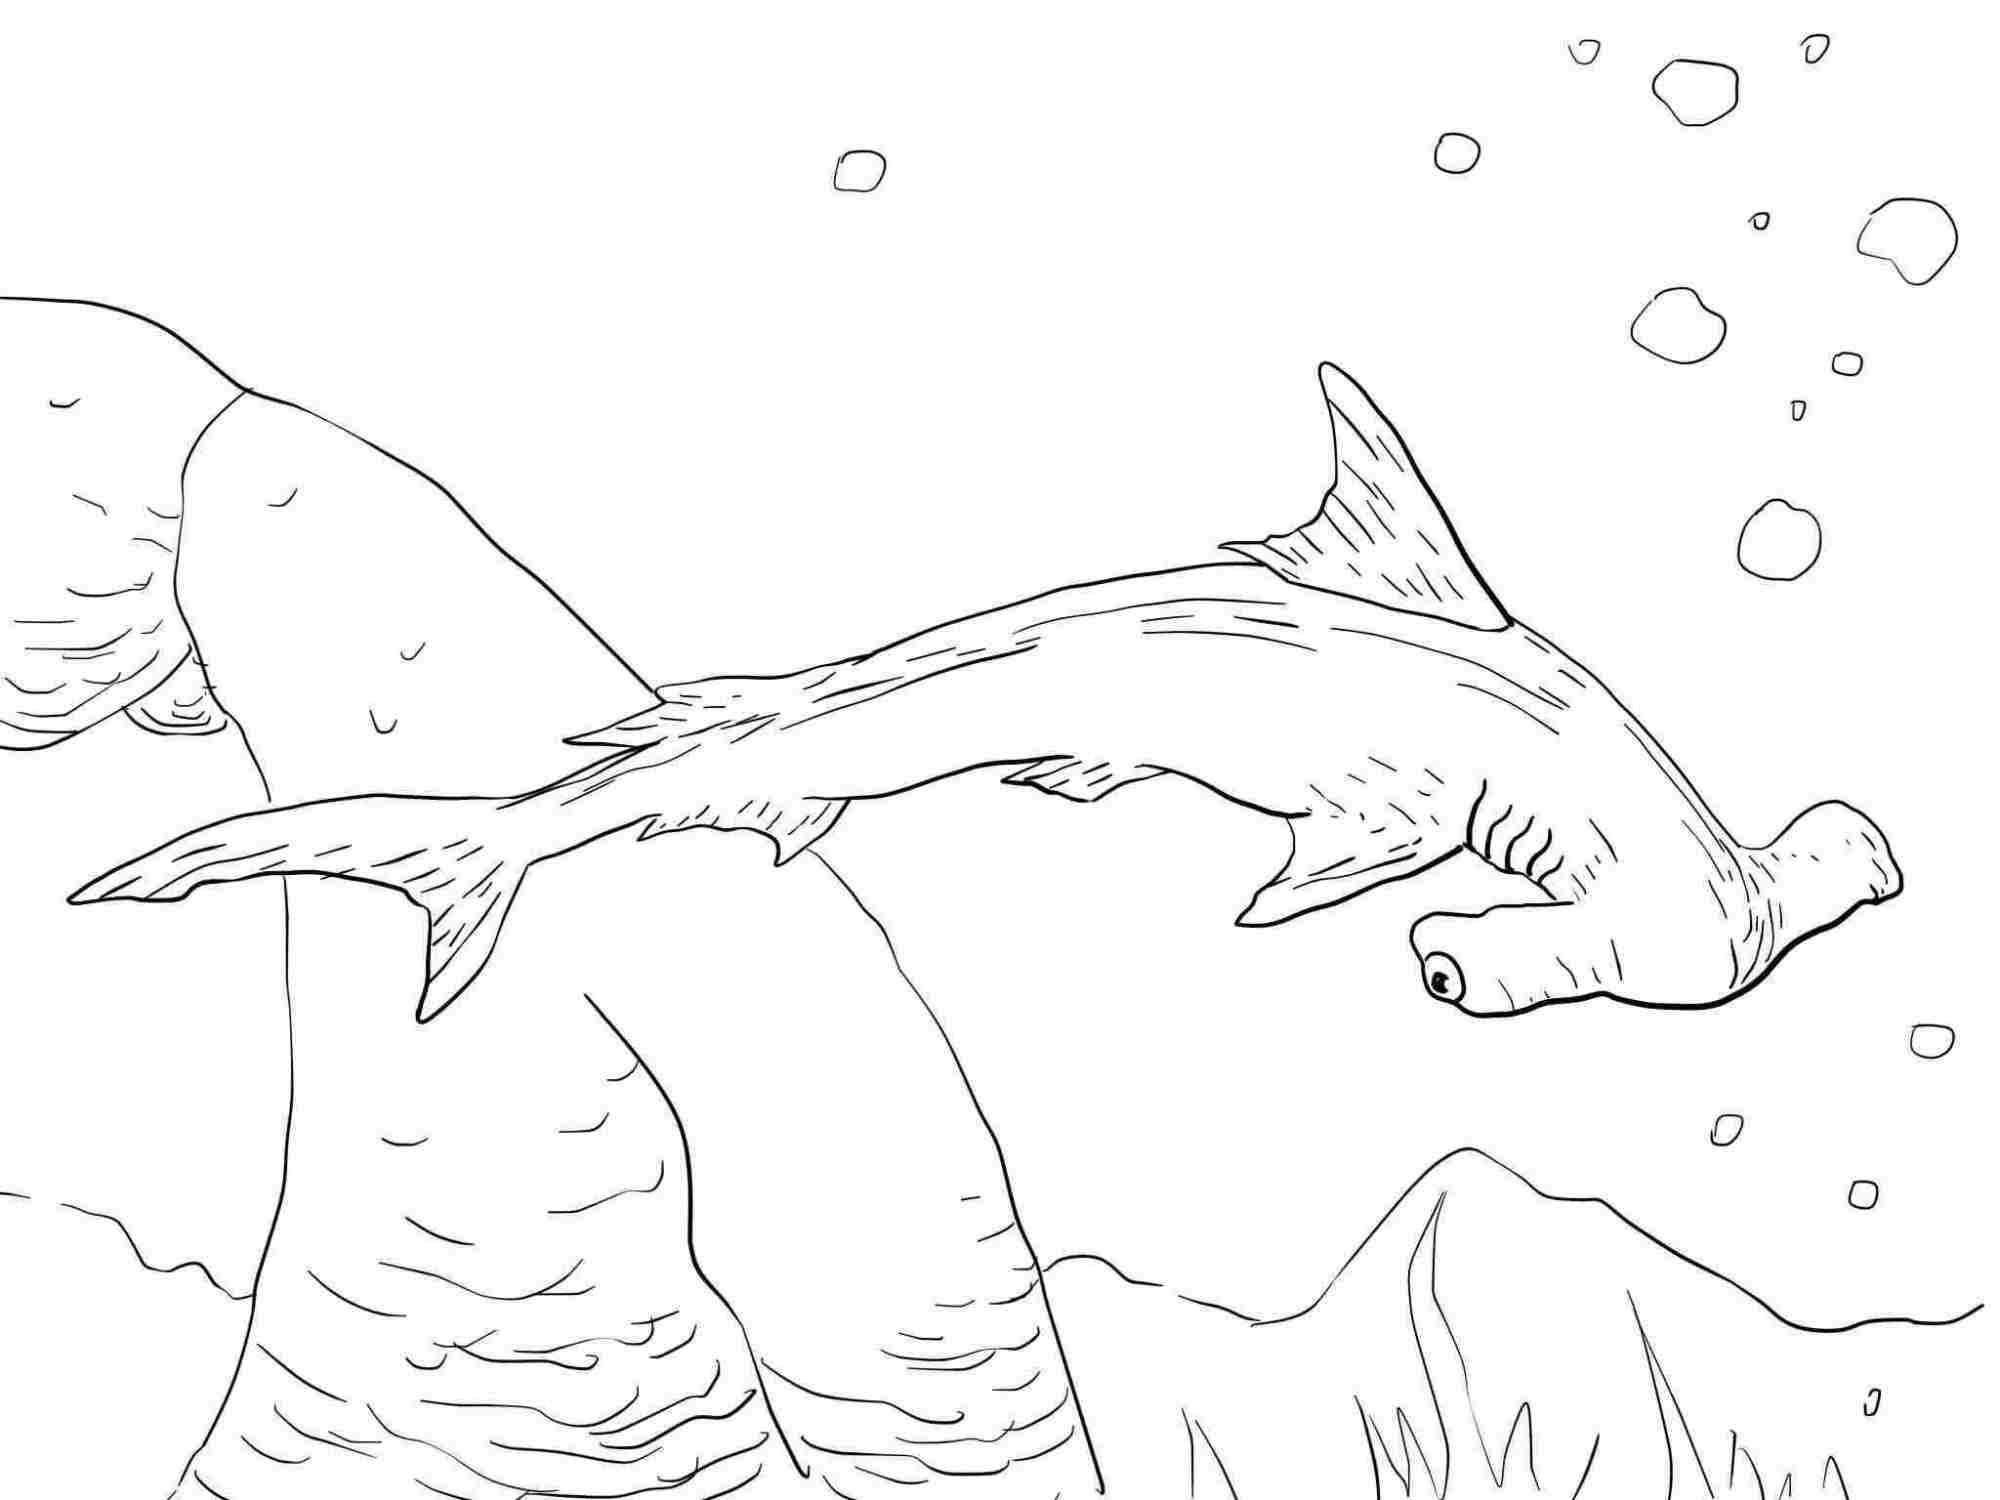 Scalloped Hammerhead Shark has a broadly arched and narrow-bladed head Coloring Page